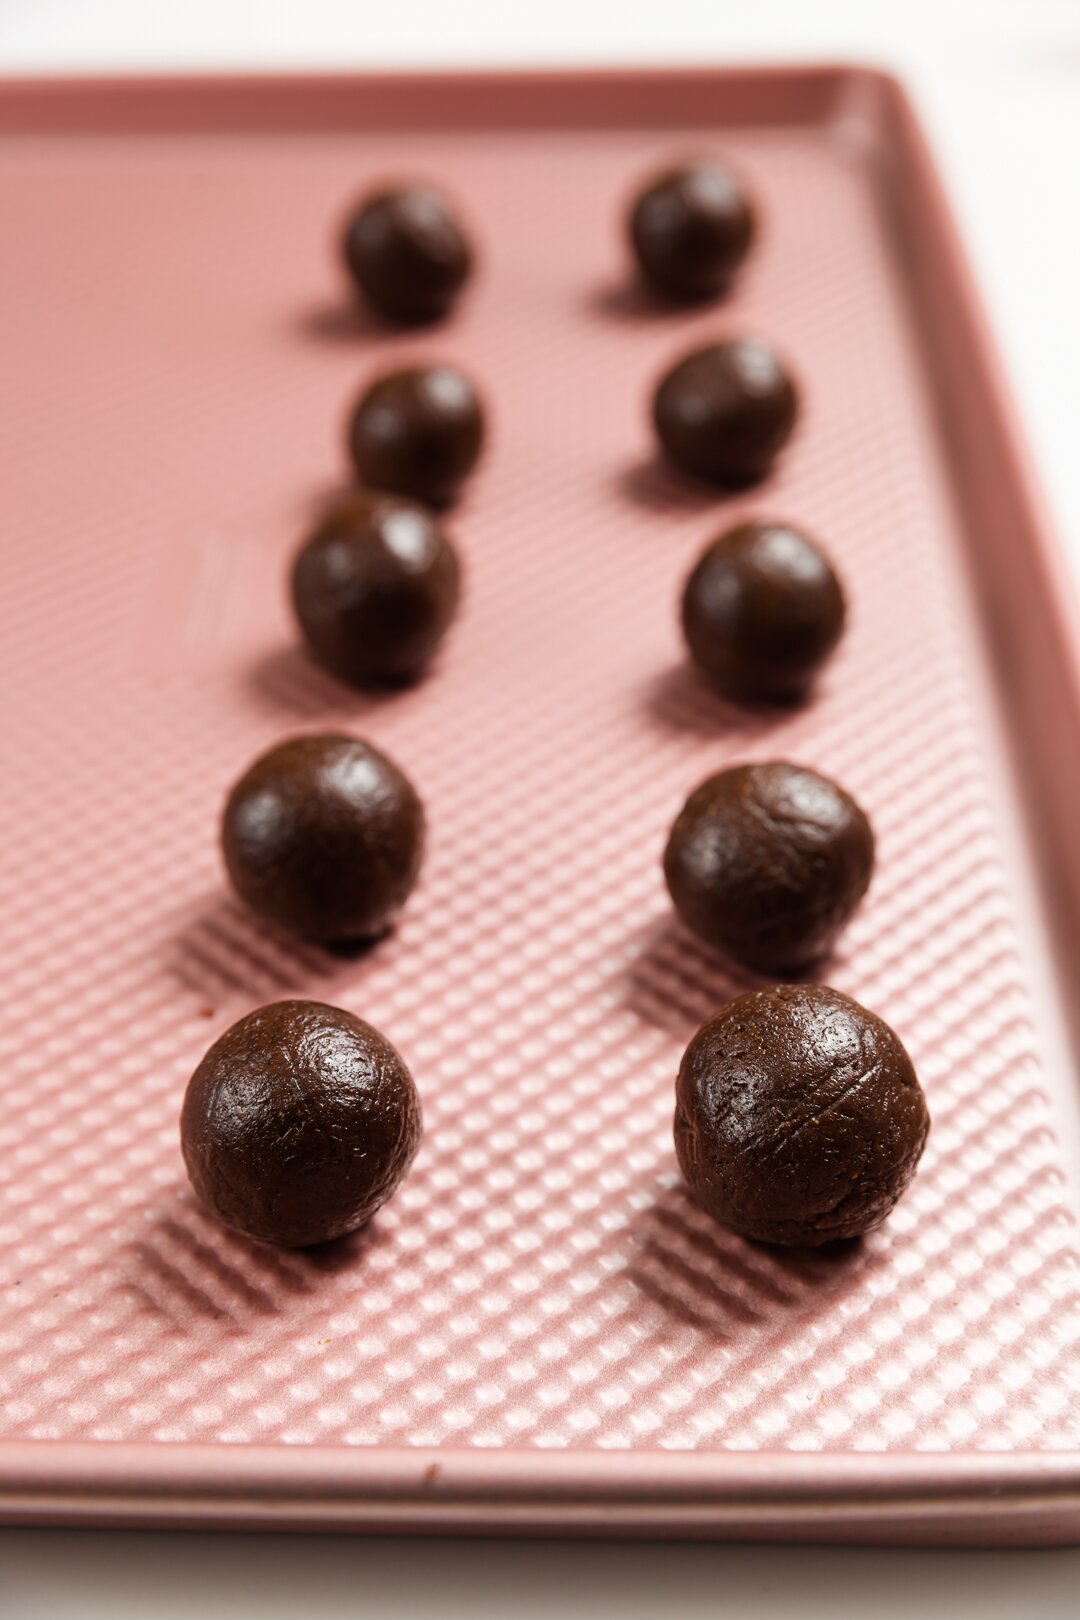 Undipped cake truffles on a cookie sheet